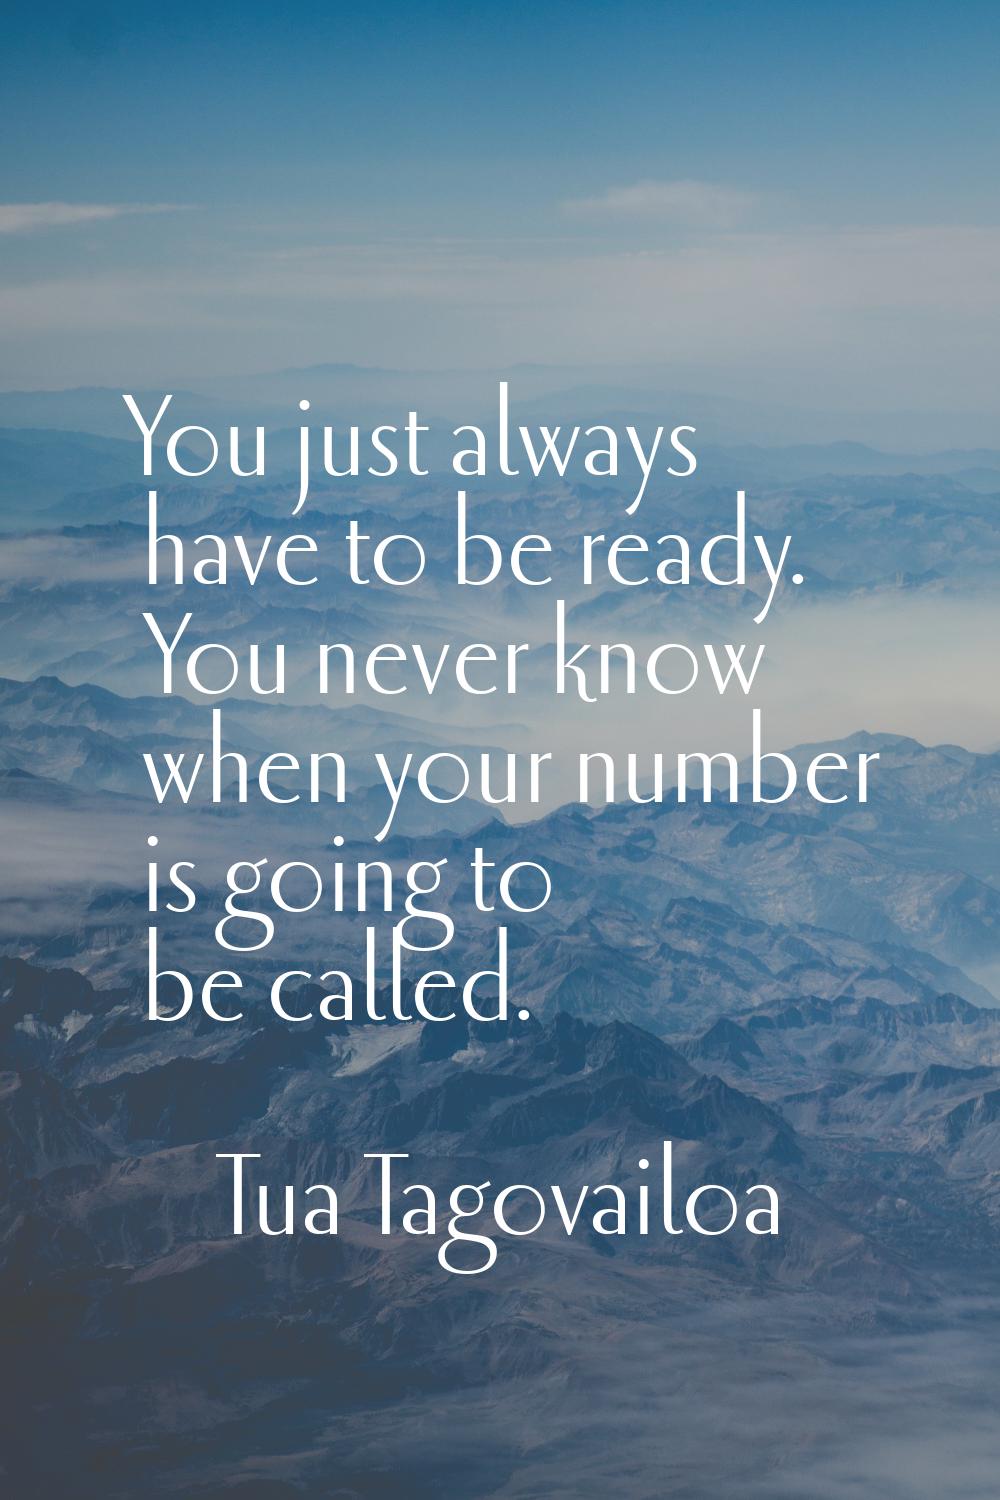 You just always have to be ready. You never know when your number is going to be called.